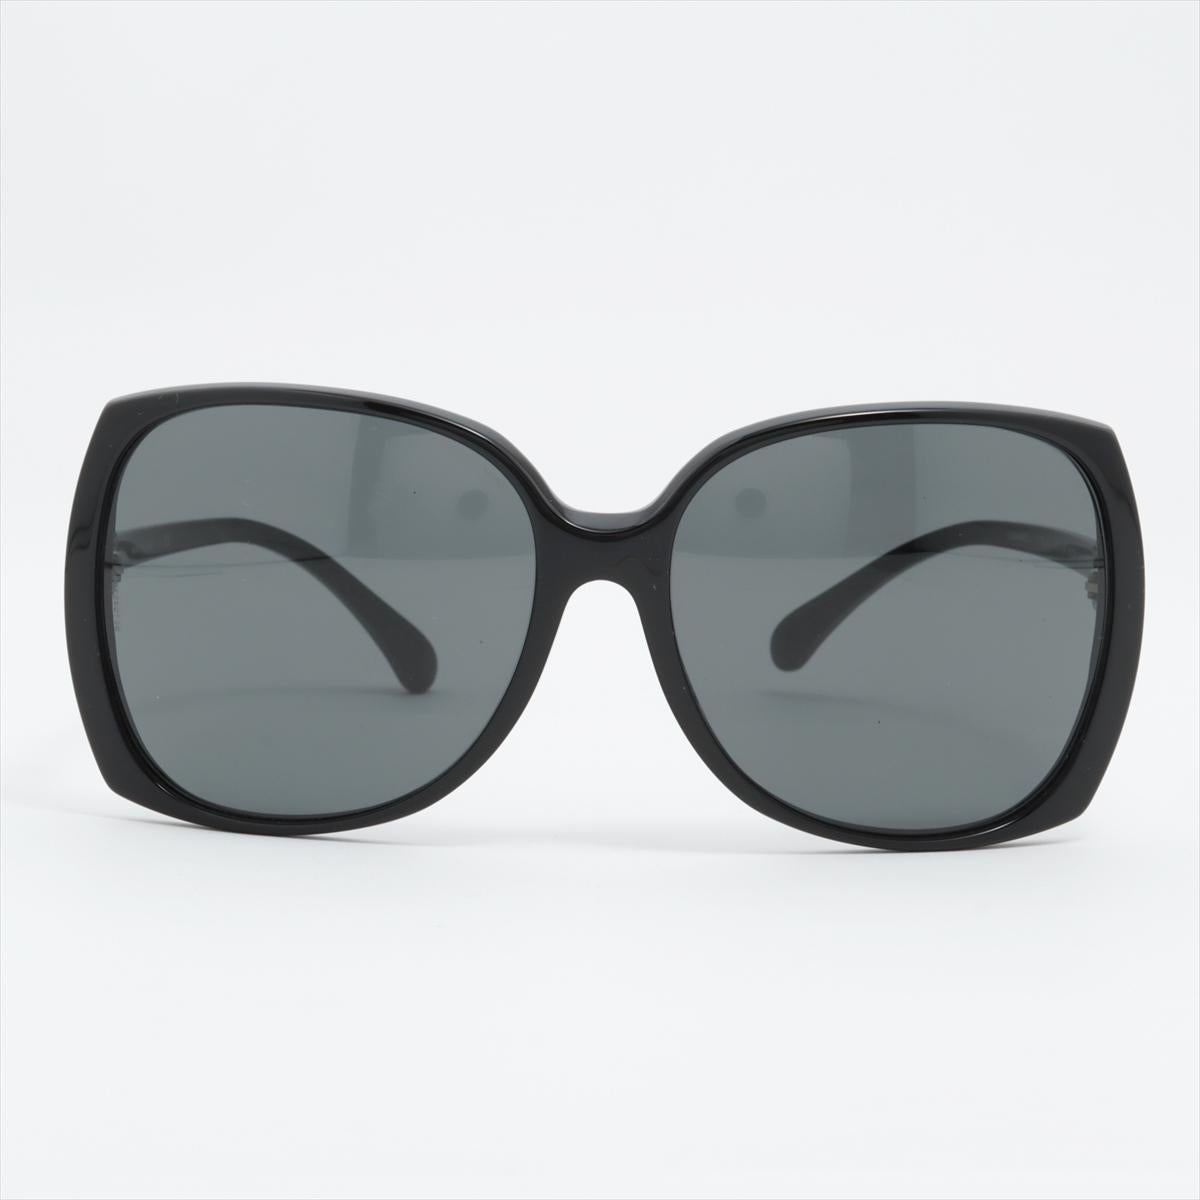 The Chanel CC Logo Oversized Square Sunglasses in Plastic Black exude timeless elegance and sophistication. Featuring oversized square frames, the sunglasses make a bold statement while maintaining a classic aesthetic. The iconic Chanel CC logo is